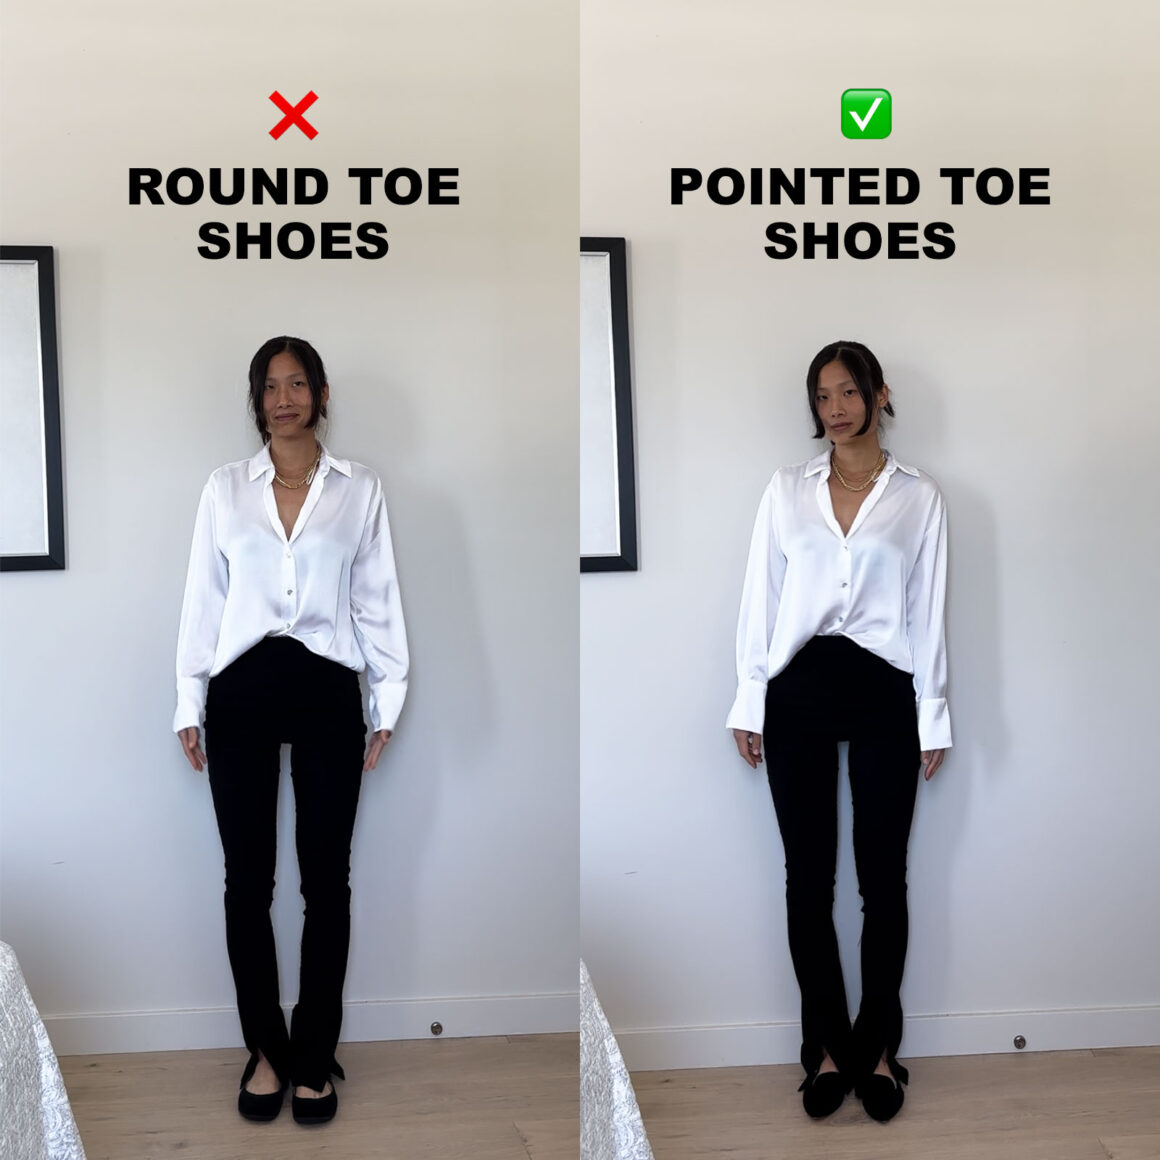 short legs round toe vs pointed toe shoes